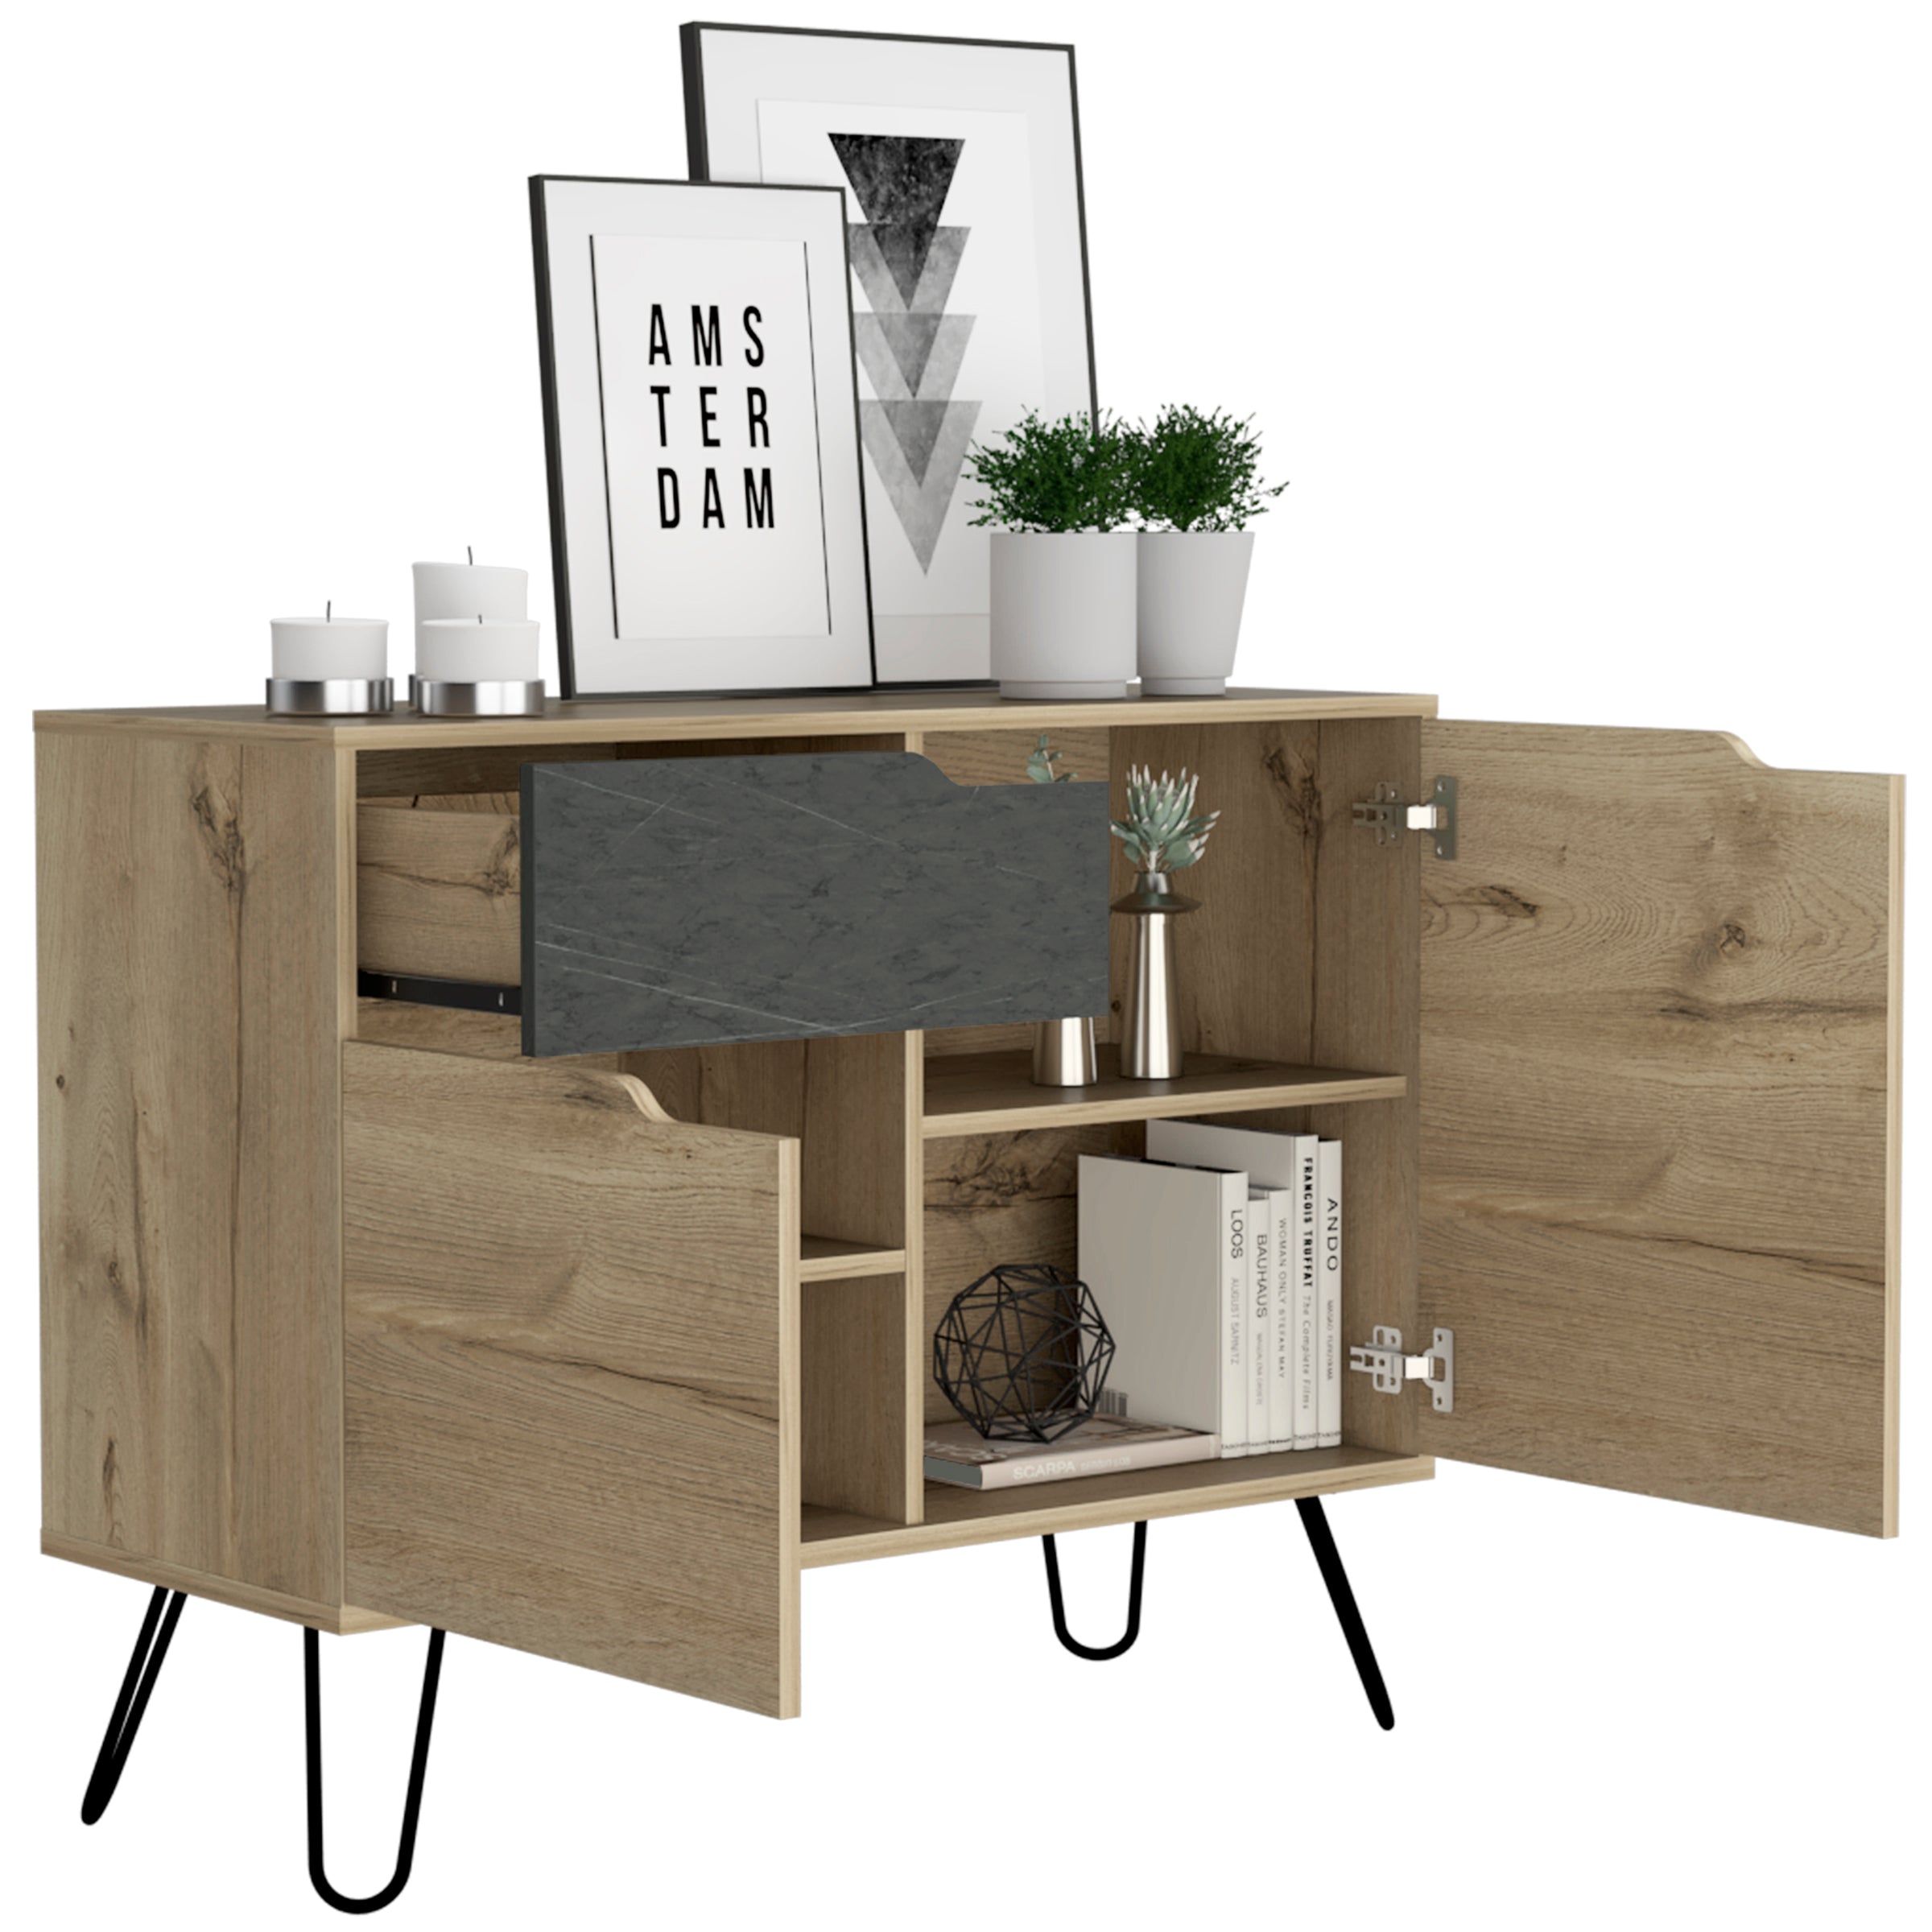 Small Sideboard With 2 Doors & 1 Drawer